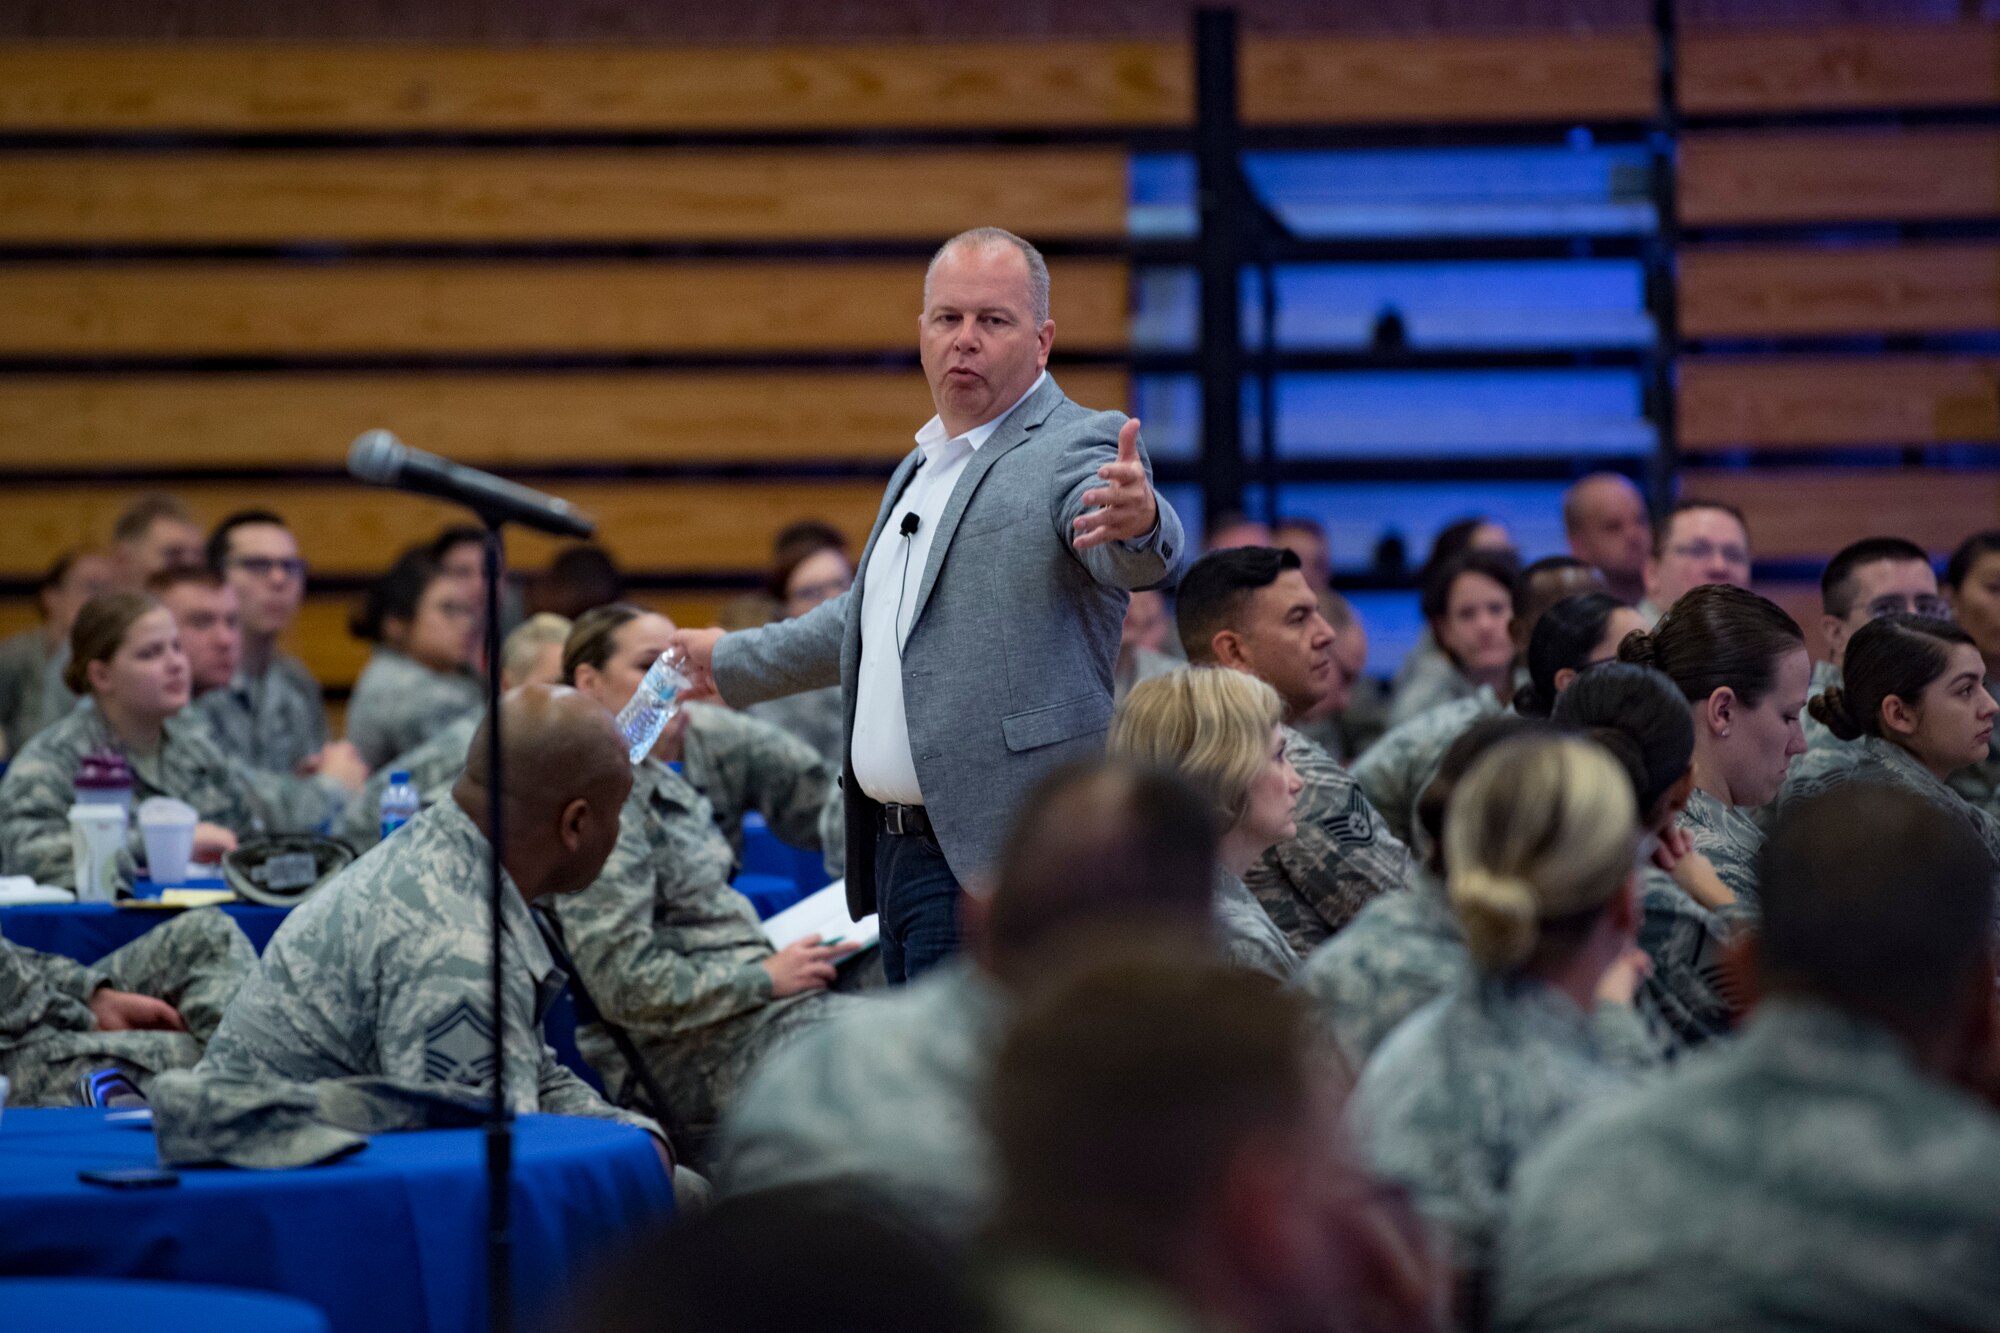 (Ret.) Chief Master Sgt. James Hotaling, the former Command Chief Master Sgt. of the Air National Guard, talks with Airmen August 17, 2018 at the Enlisted Leadership Symposium (ELS) at Camp Dawson, W.Va. More than 400 Airmen representing Air National Guard units from each state and territory attended the ELS, a three-day event focused on leadership and professional development. (U.S. Air National Guard Photo by Airman 1st Class Caleb Vance)